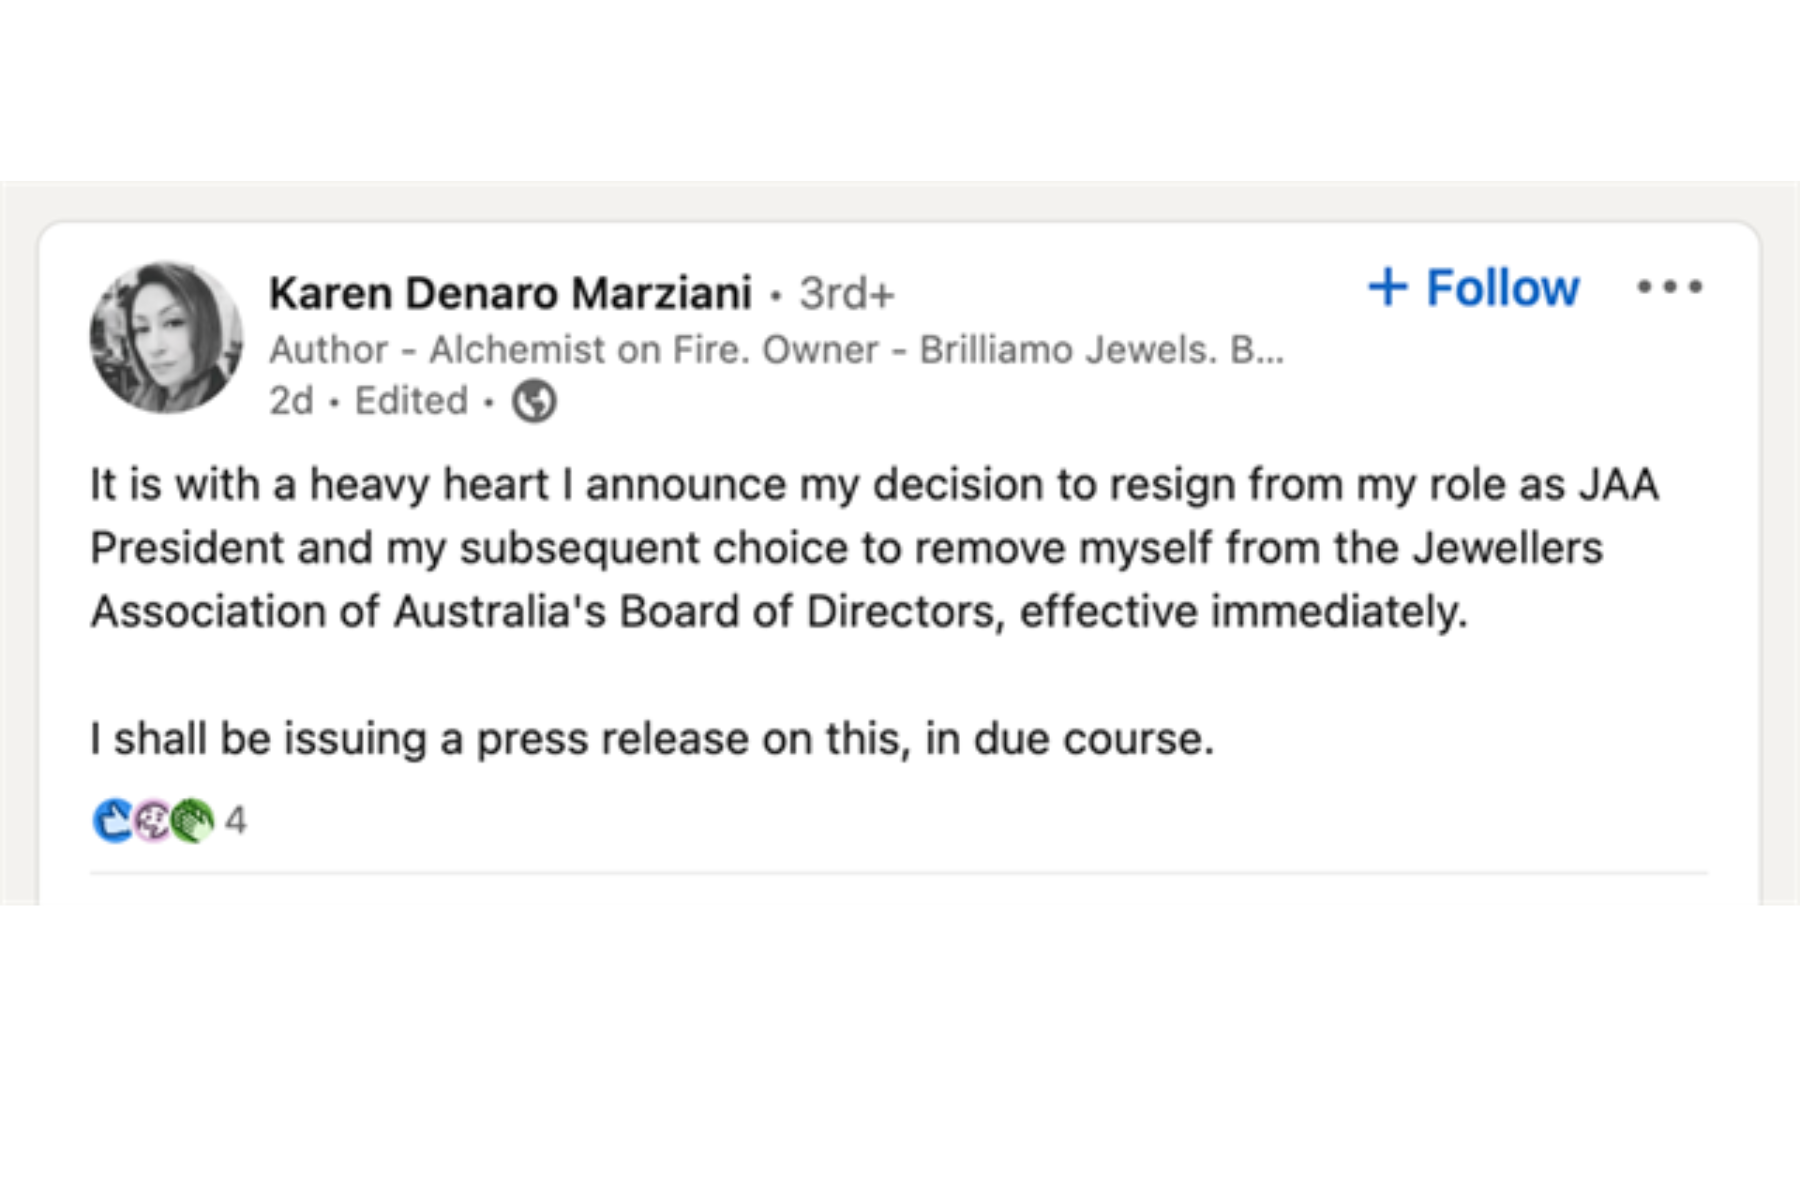 The shocking announcement or resignation of JAA's former President on LinkedIn